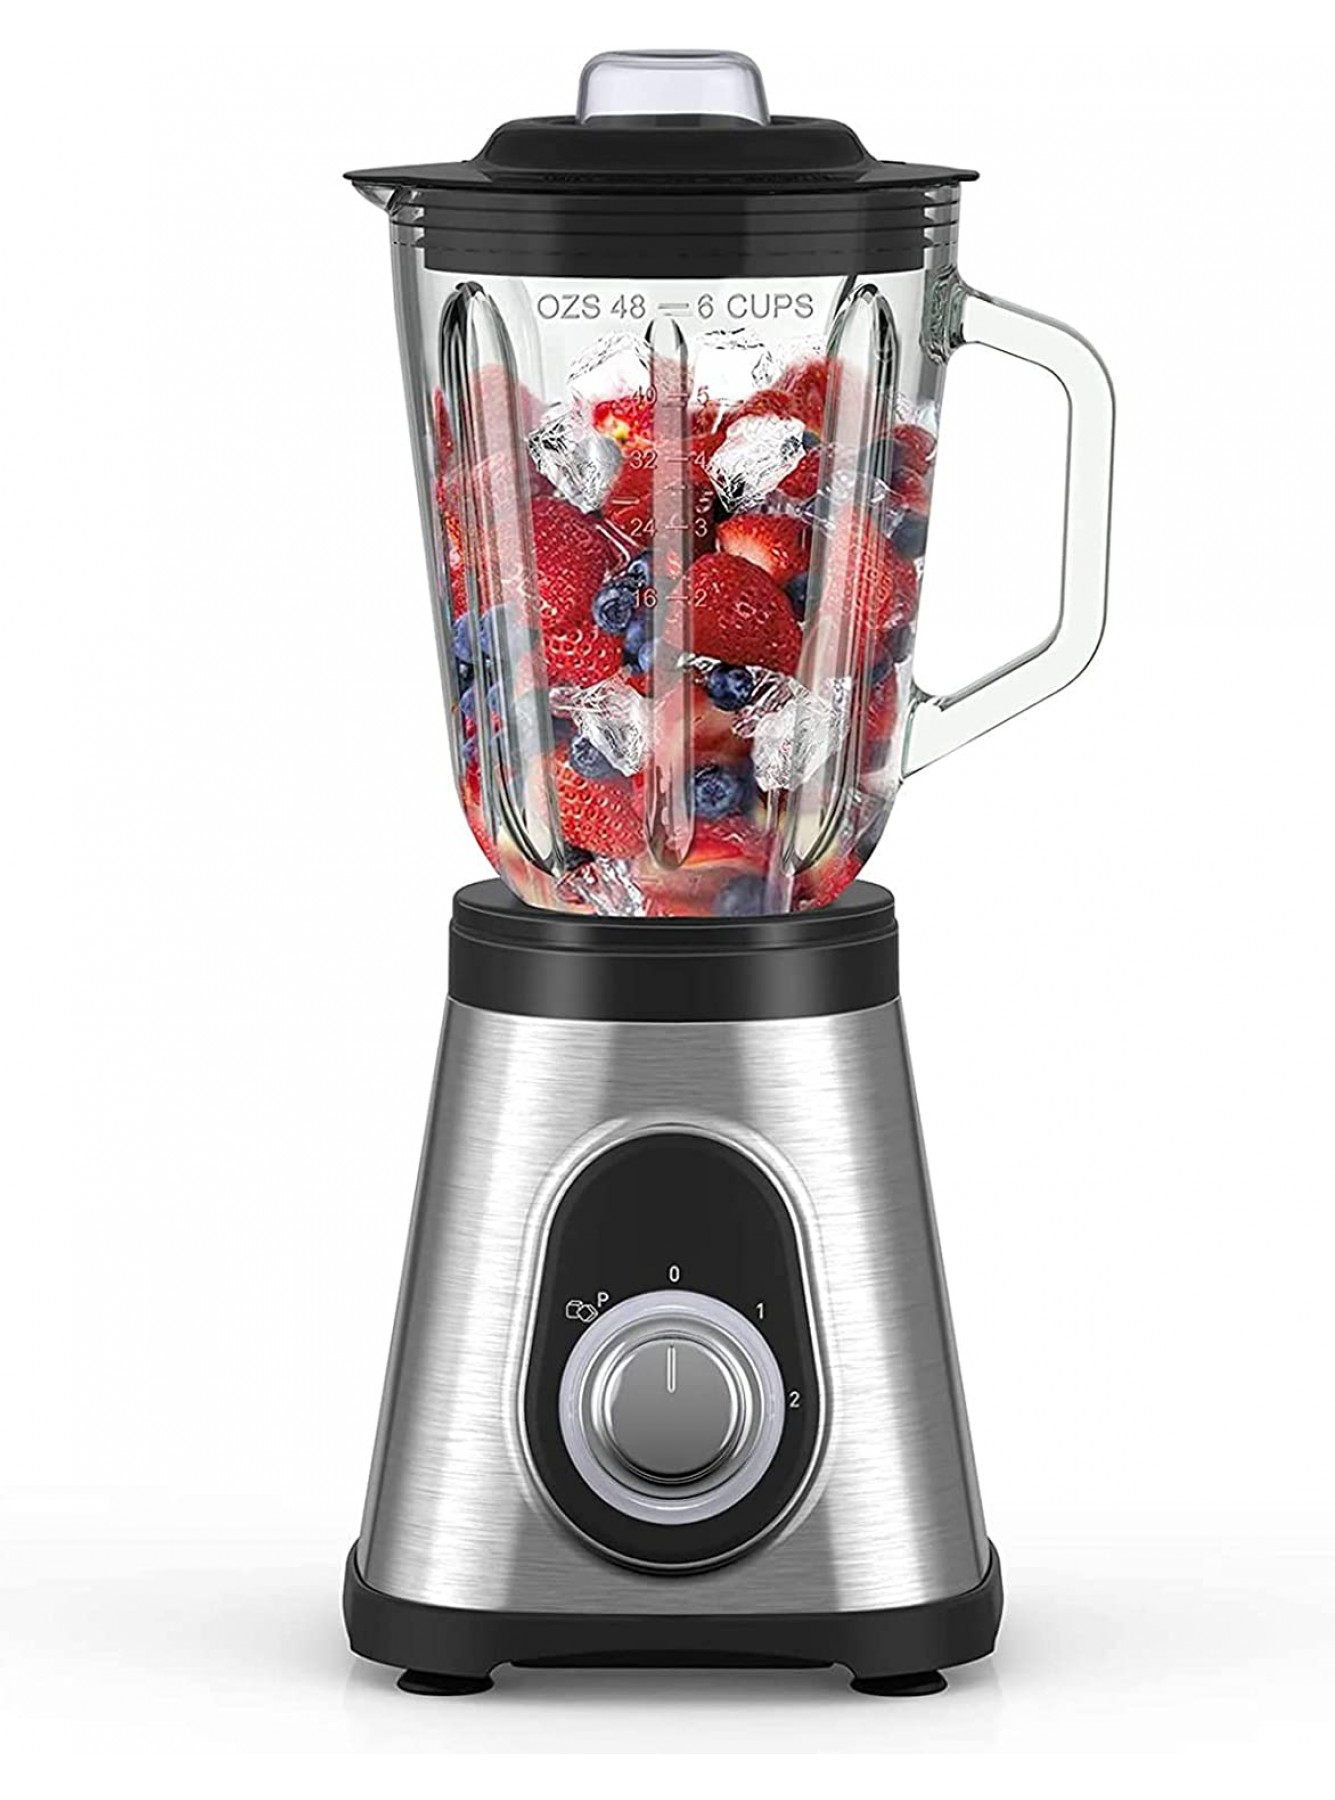 Glass Smoothie Blender for Kitchen 750W Professional Countertop Blender 27,000RPM for Shakes with 48oz BPA-Free Cup 6 Stainless Steel Blades and 2 Speeds & Pulse Function B09MN7F2QY